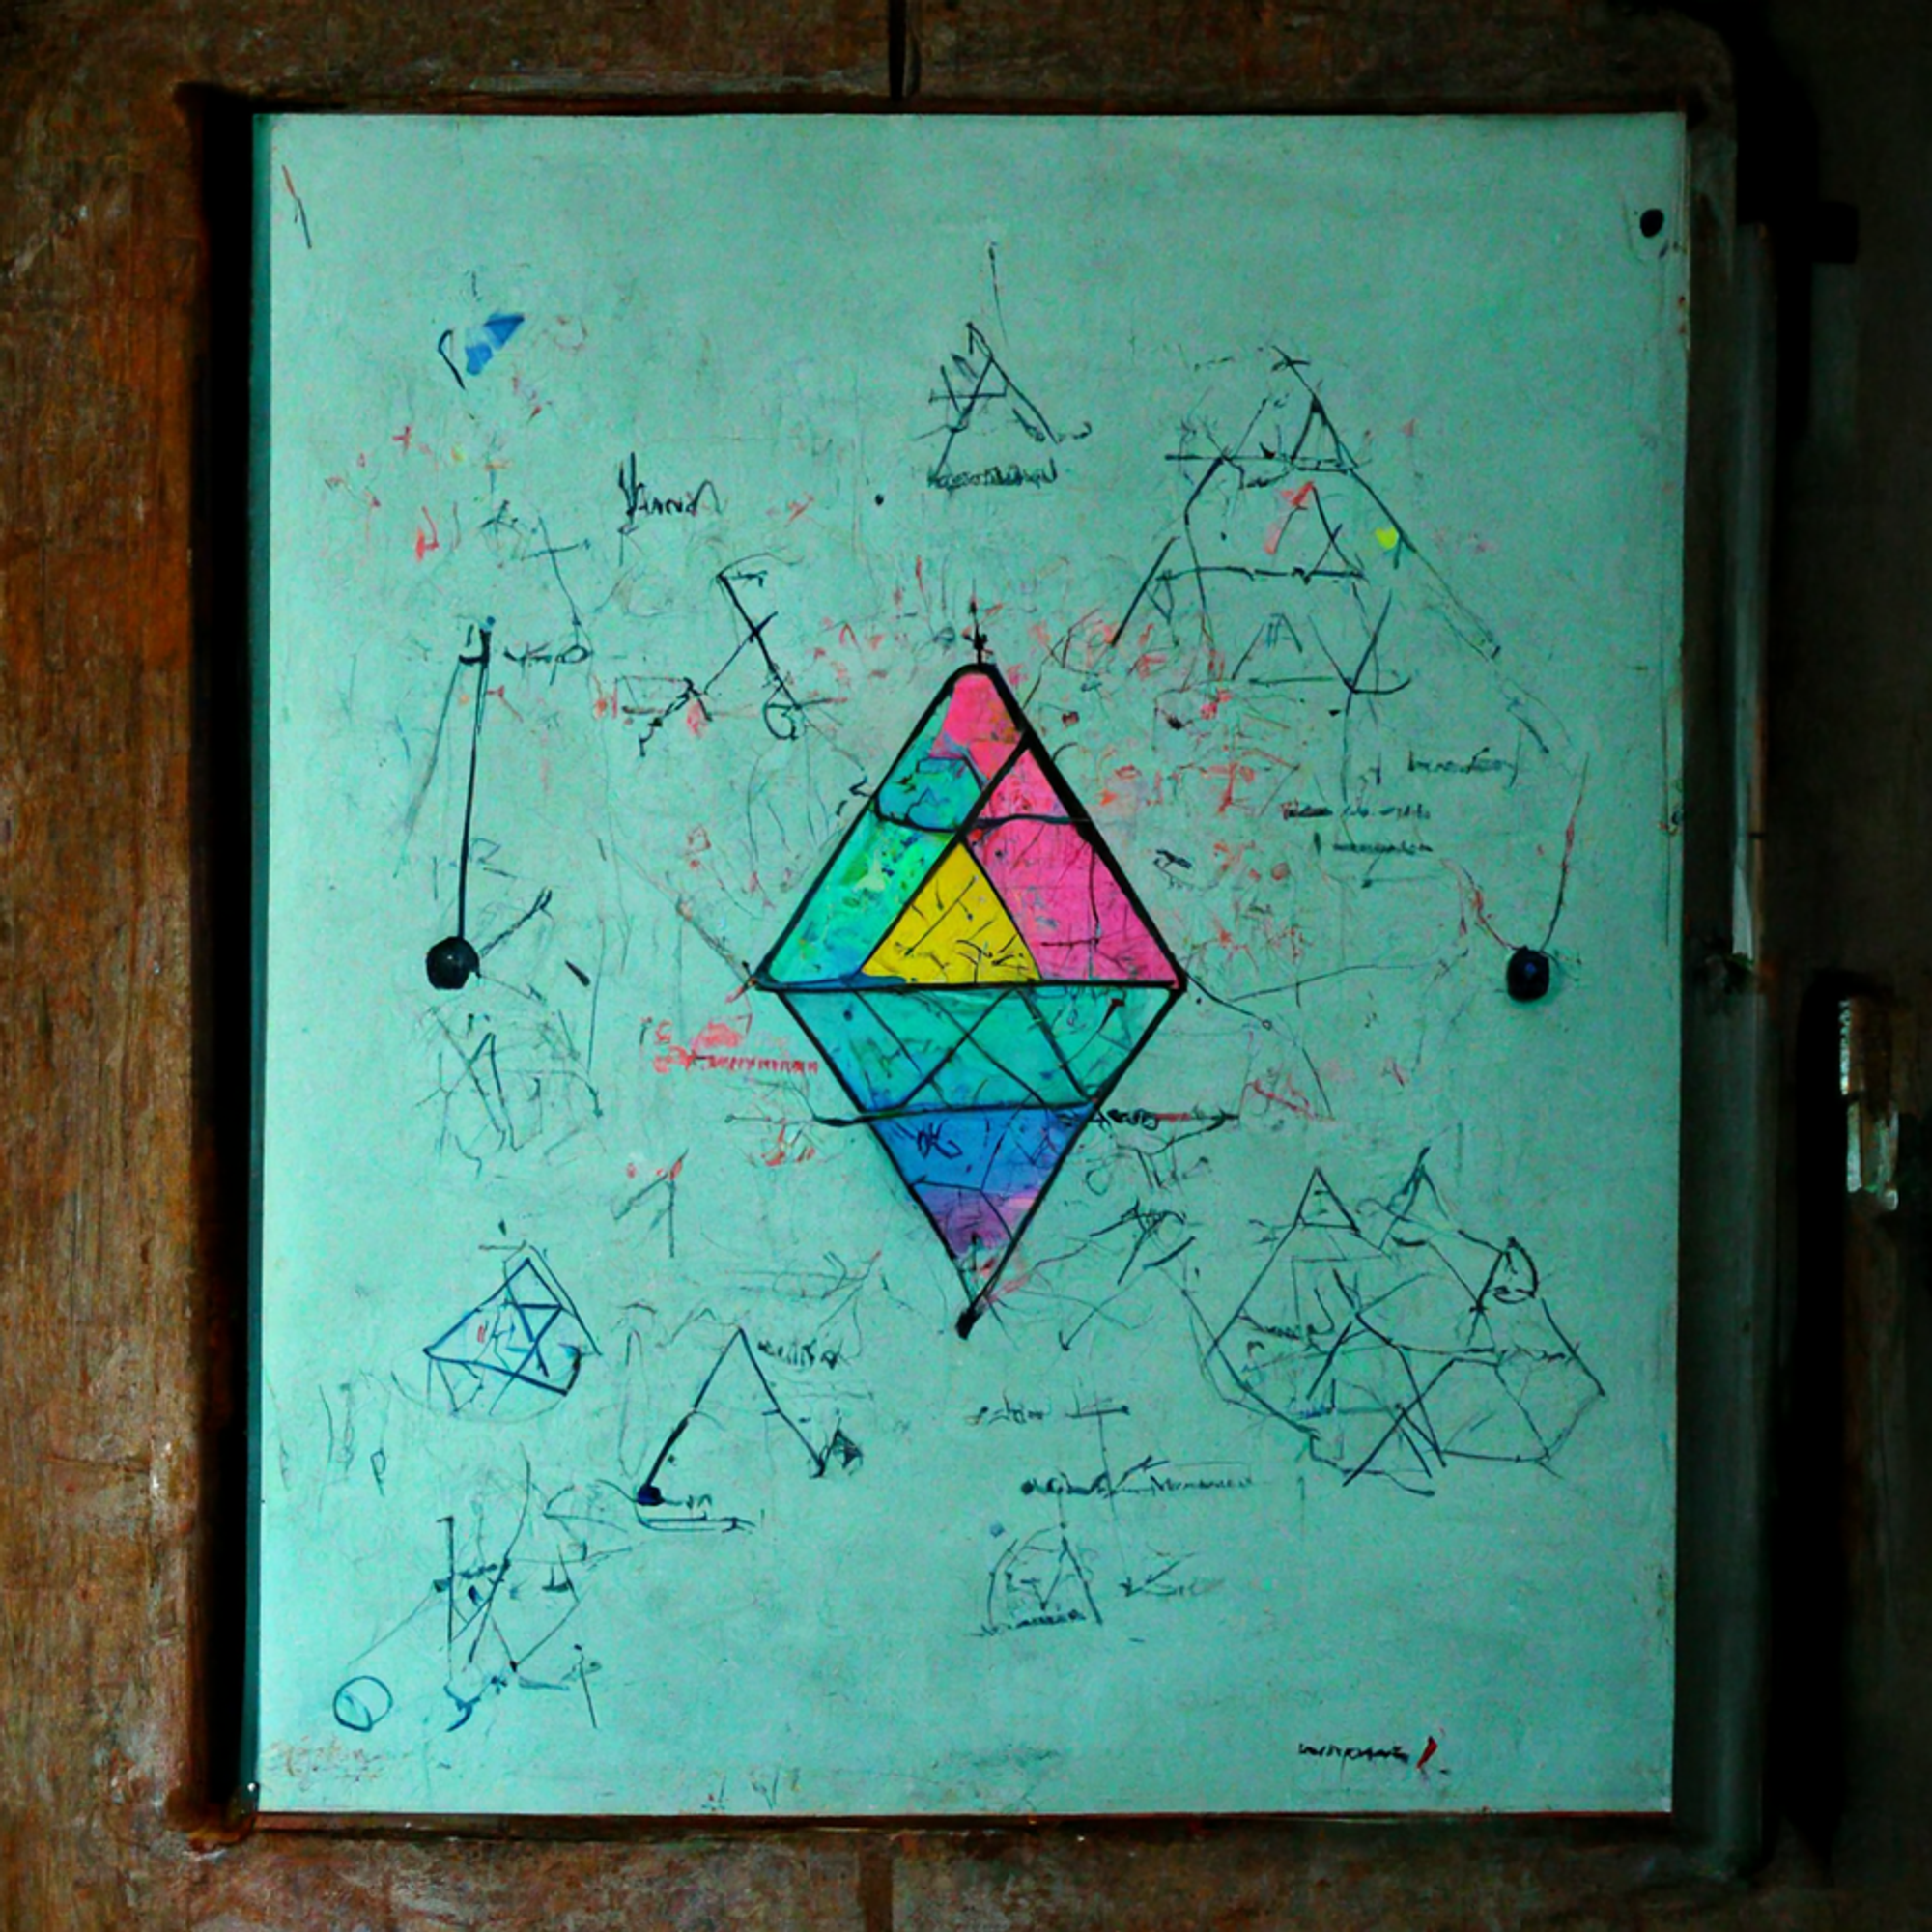 /imagine a white board with a triangle, a diamond, a hexagon, and an octogon, in different colors, with various colored scribbles and arrows all around them